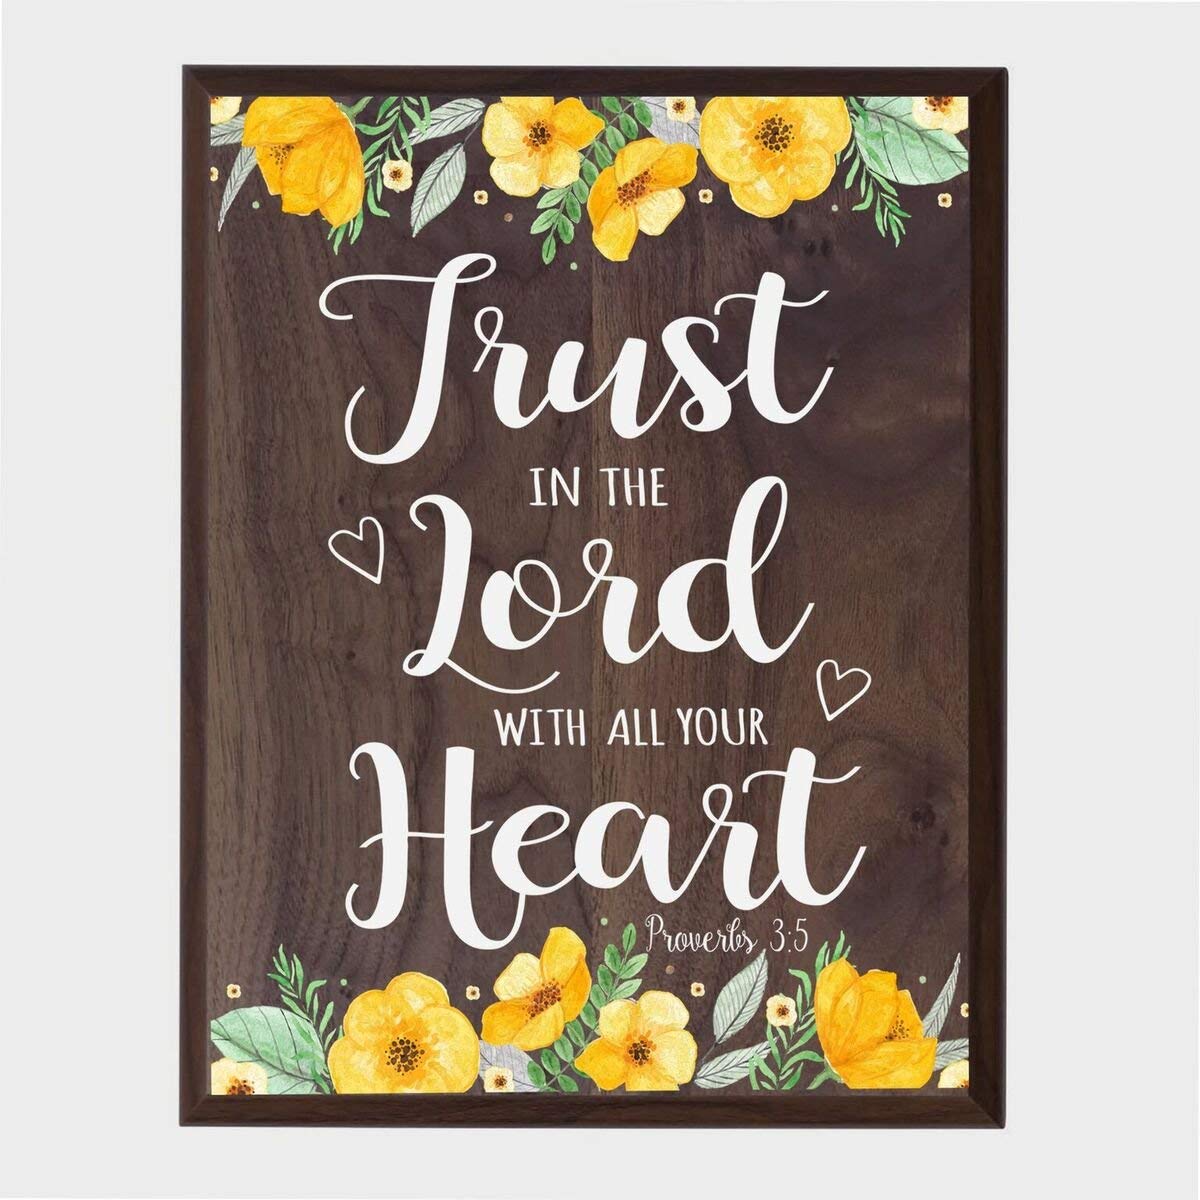 Inspirational Walnut Wood Home Decor Wall Plaque - Trust In The Lord - LifeSong Milestones